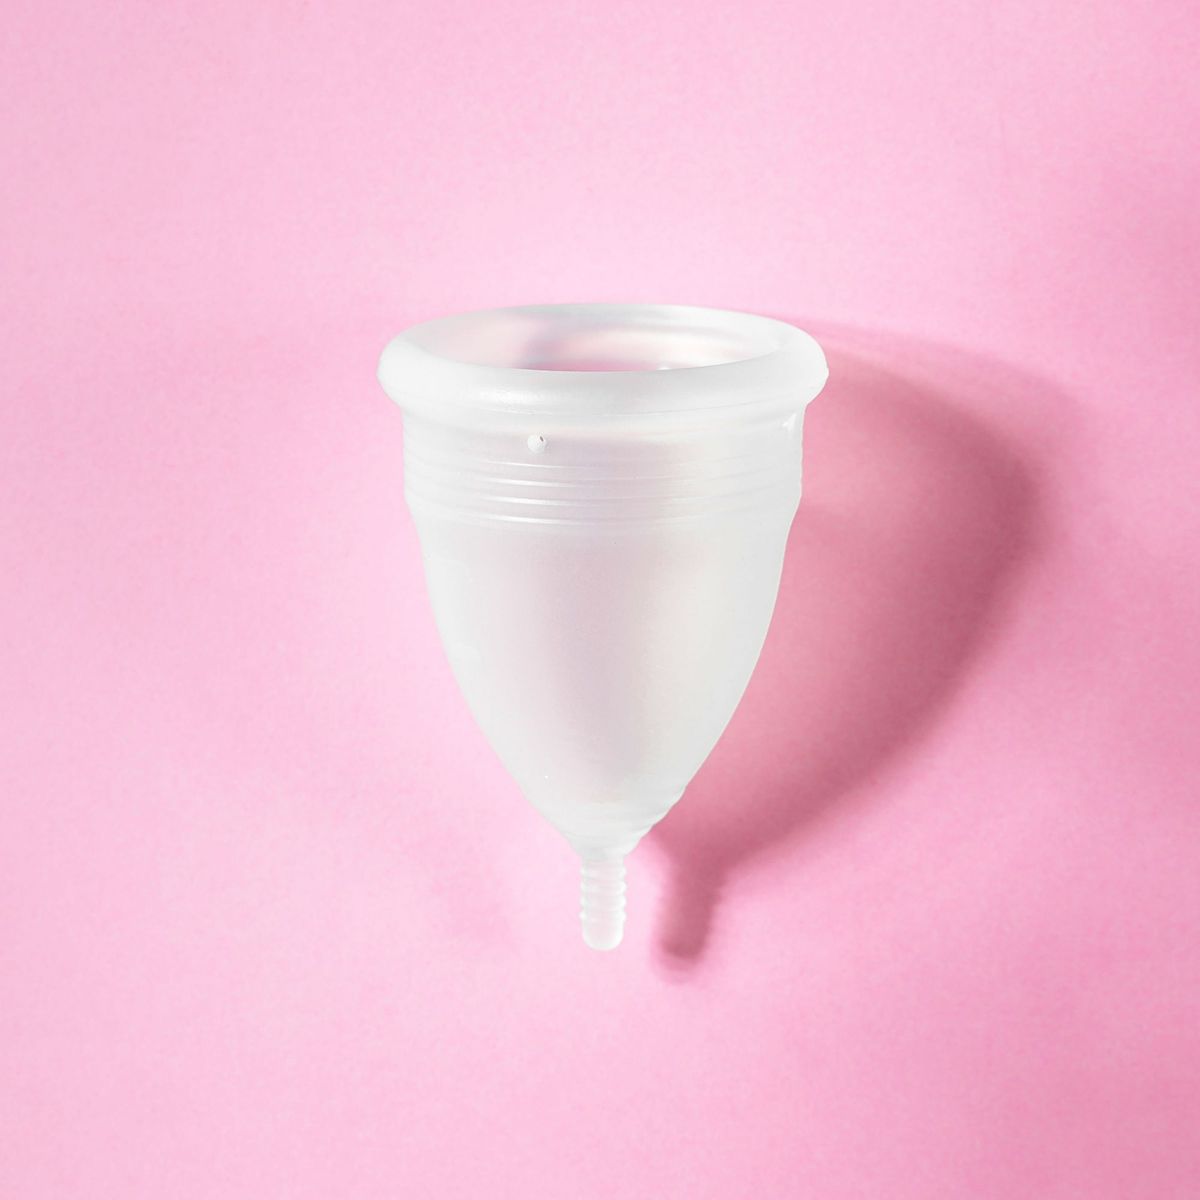 How to Use a Menstrual Cup - Menstrual Cup Tips | InStyle